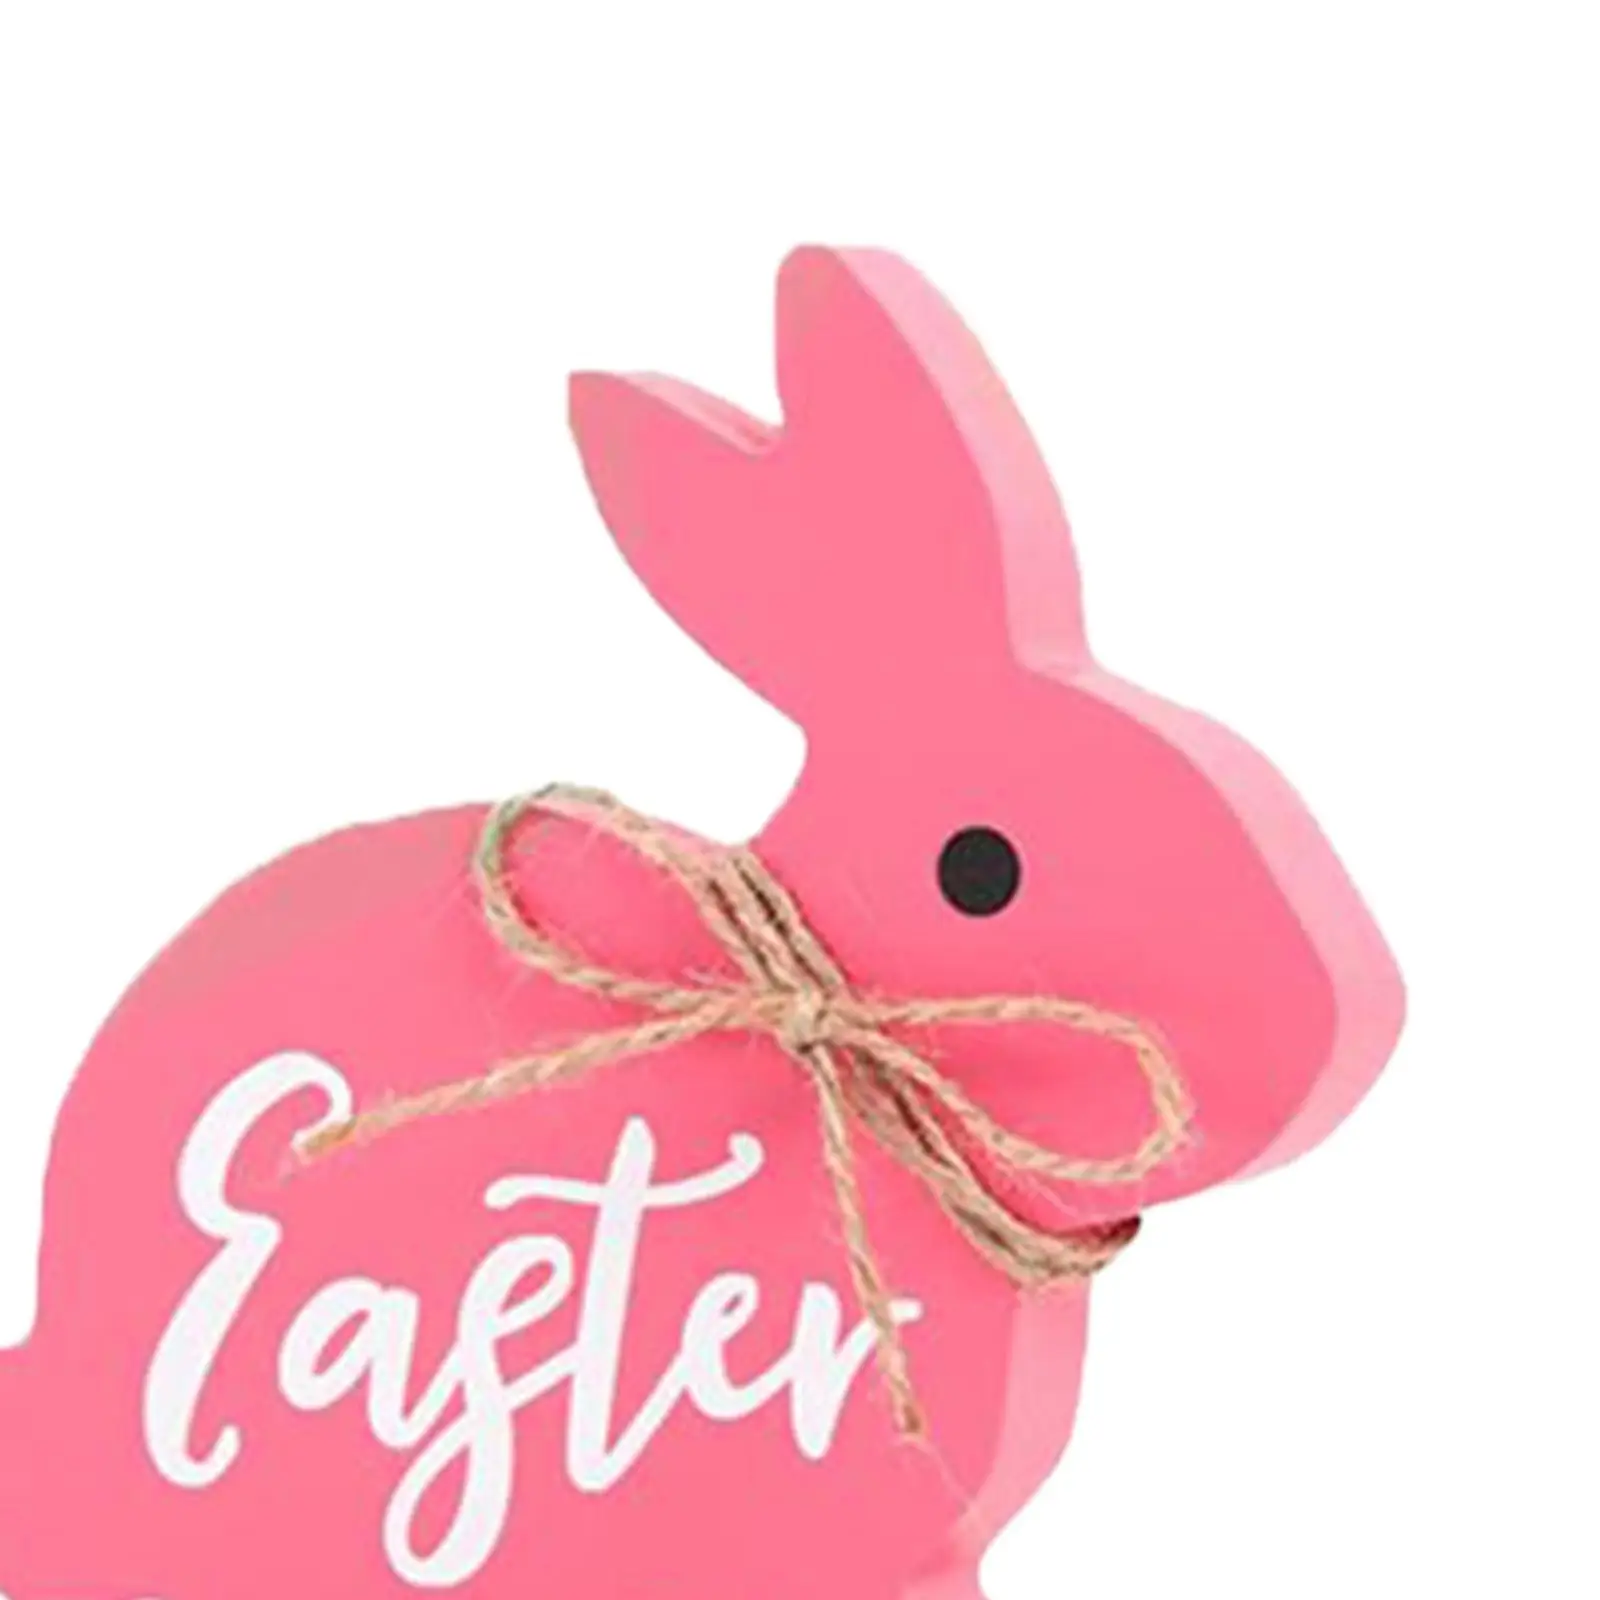 Easter Bunny Table Wooden Signs Table Centerpiece Happy Easter Rabbit Decorative for Office Farmhouse Kitchen Events Bookshelf